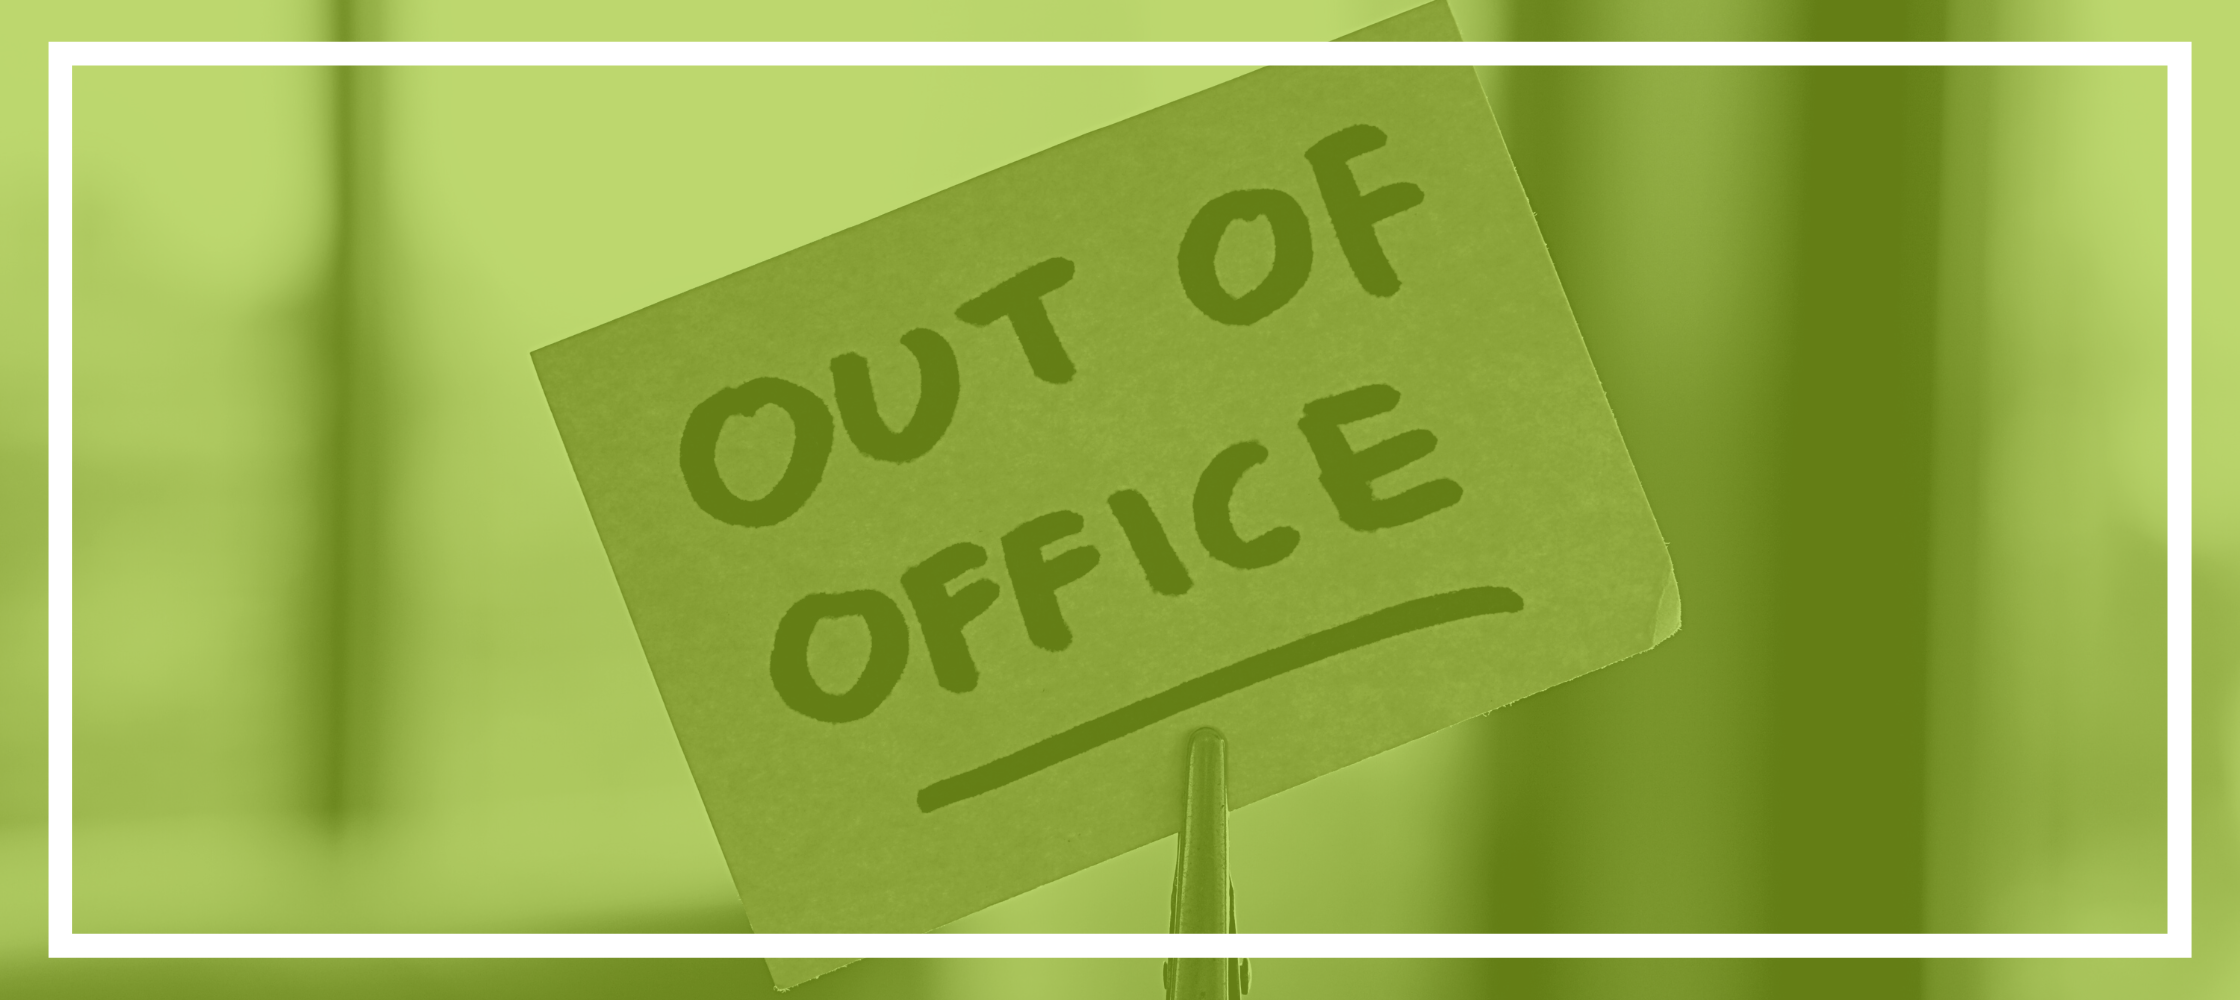 Out of office for the holidays